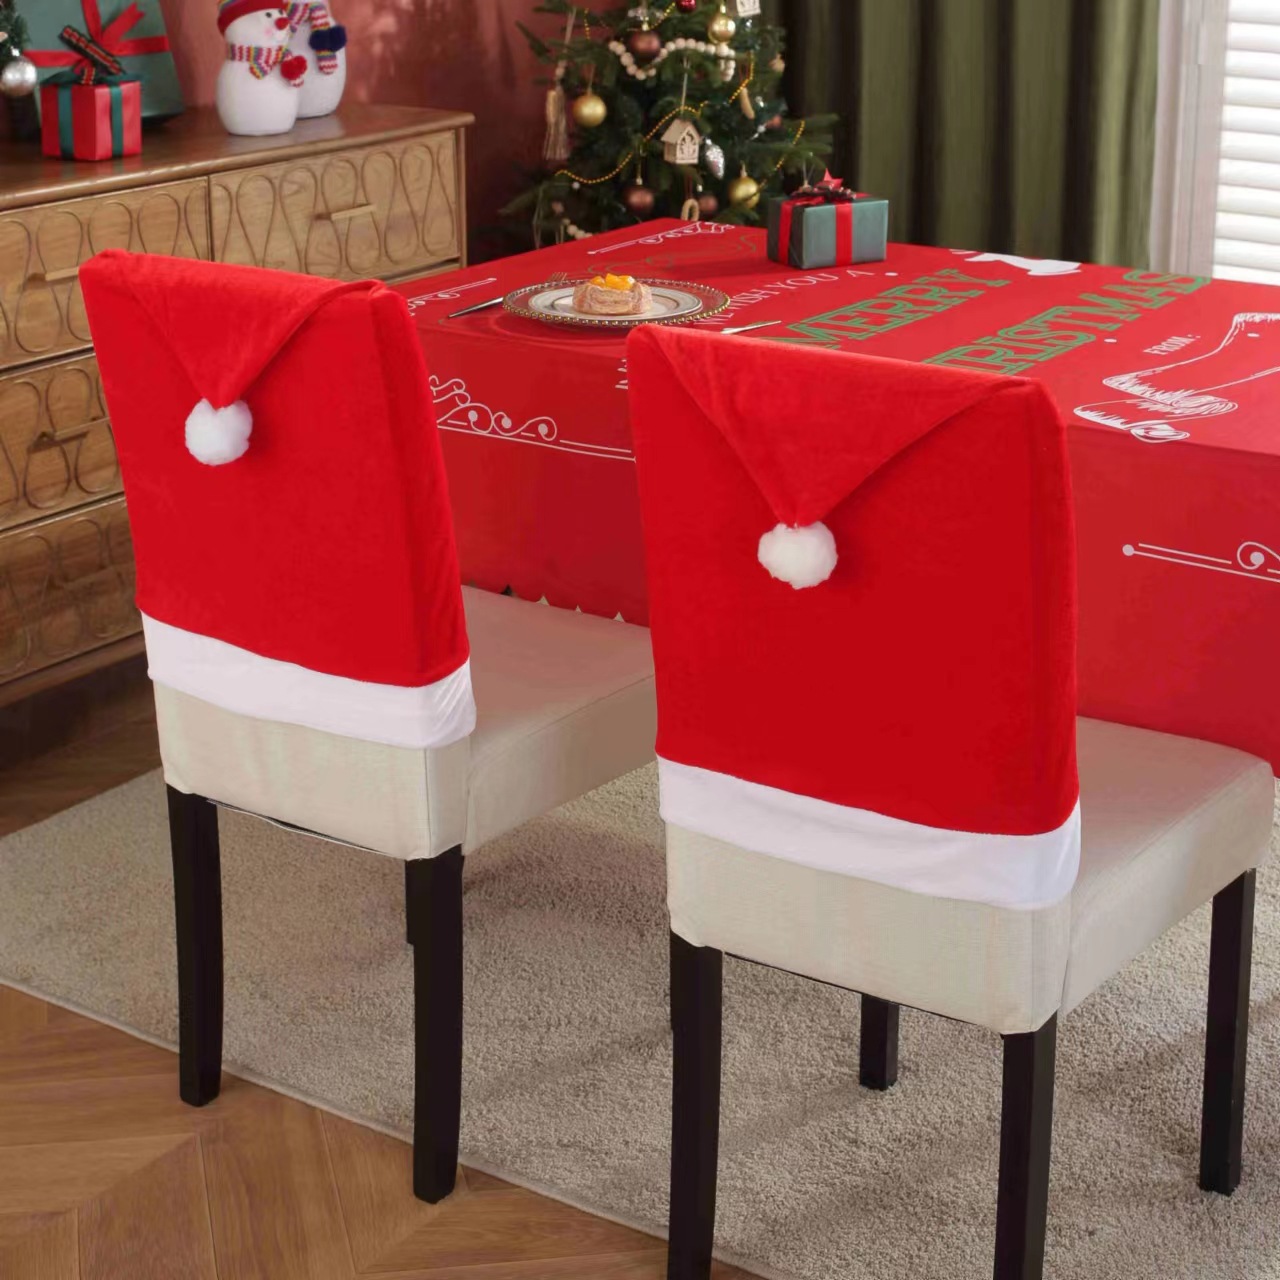 The "Krok" red velvet Christmas chair cover is a decorative seat cover specially designed for the festive Christmas season. With its elegant Northern European style, durable polyester material and versatility, it is the perfect addition to any Christmas decor.